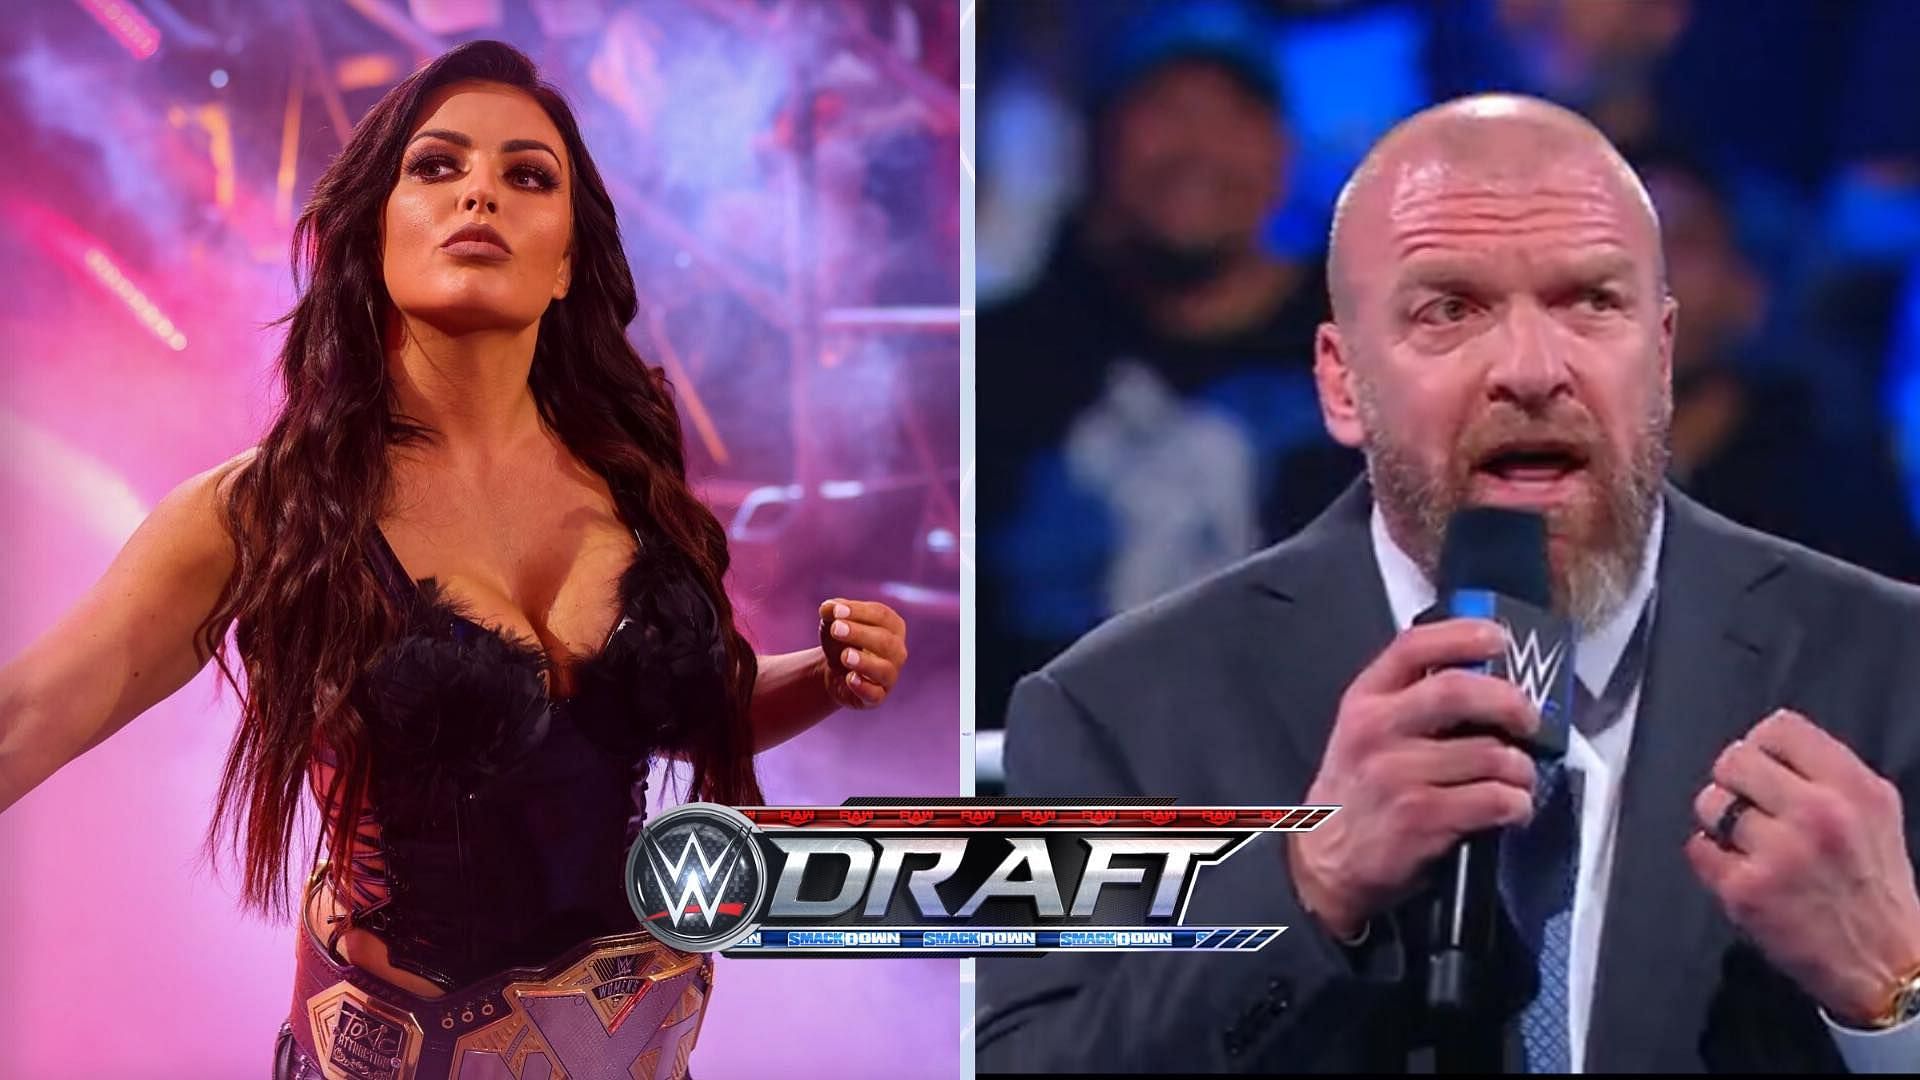 Triple H recently announced the 2023 WWE Draft